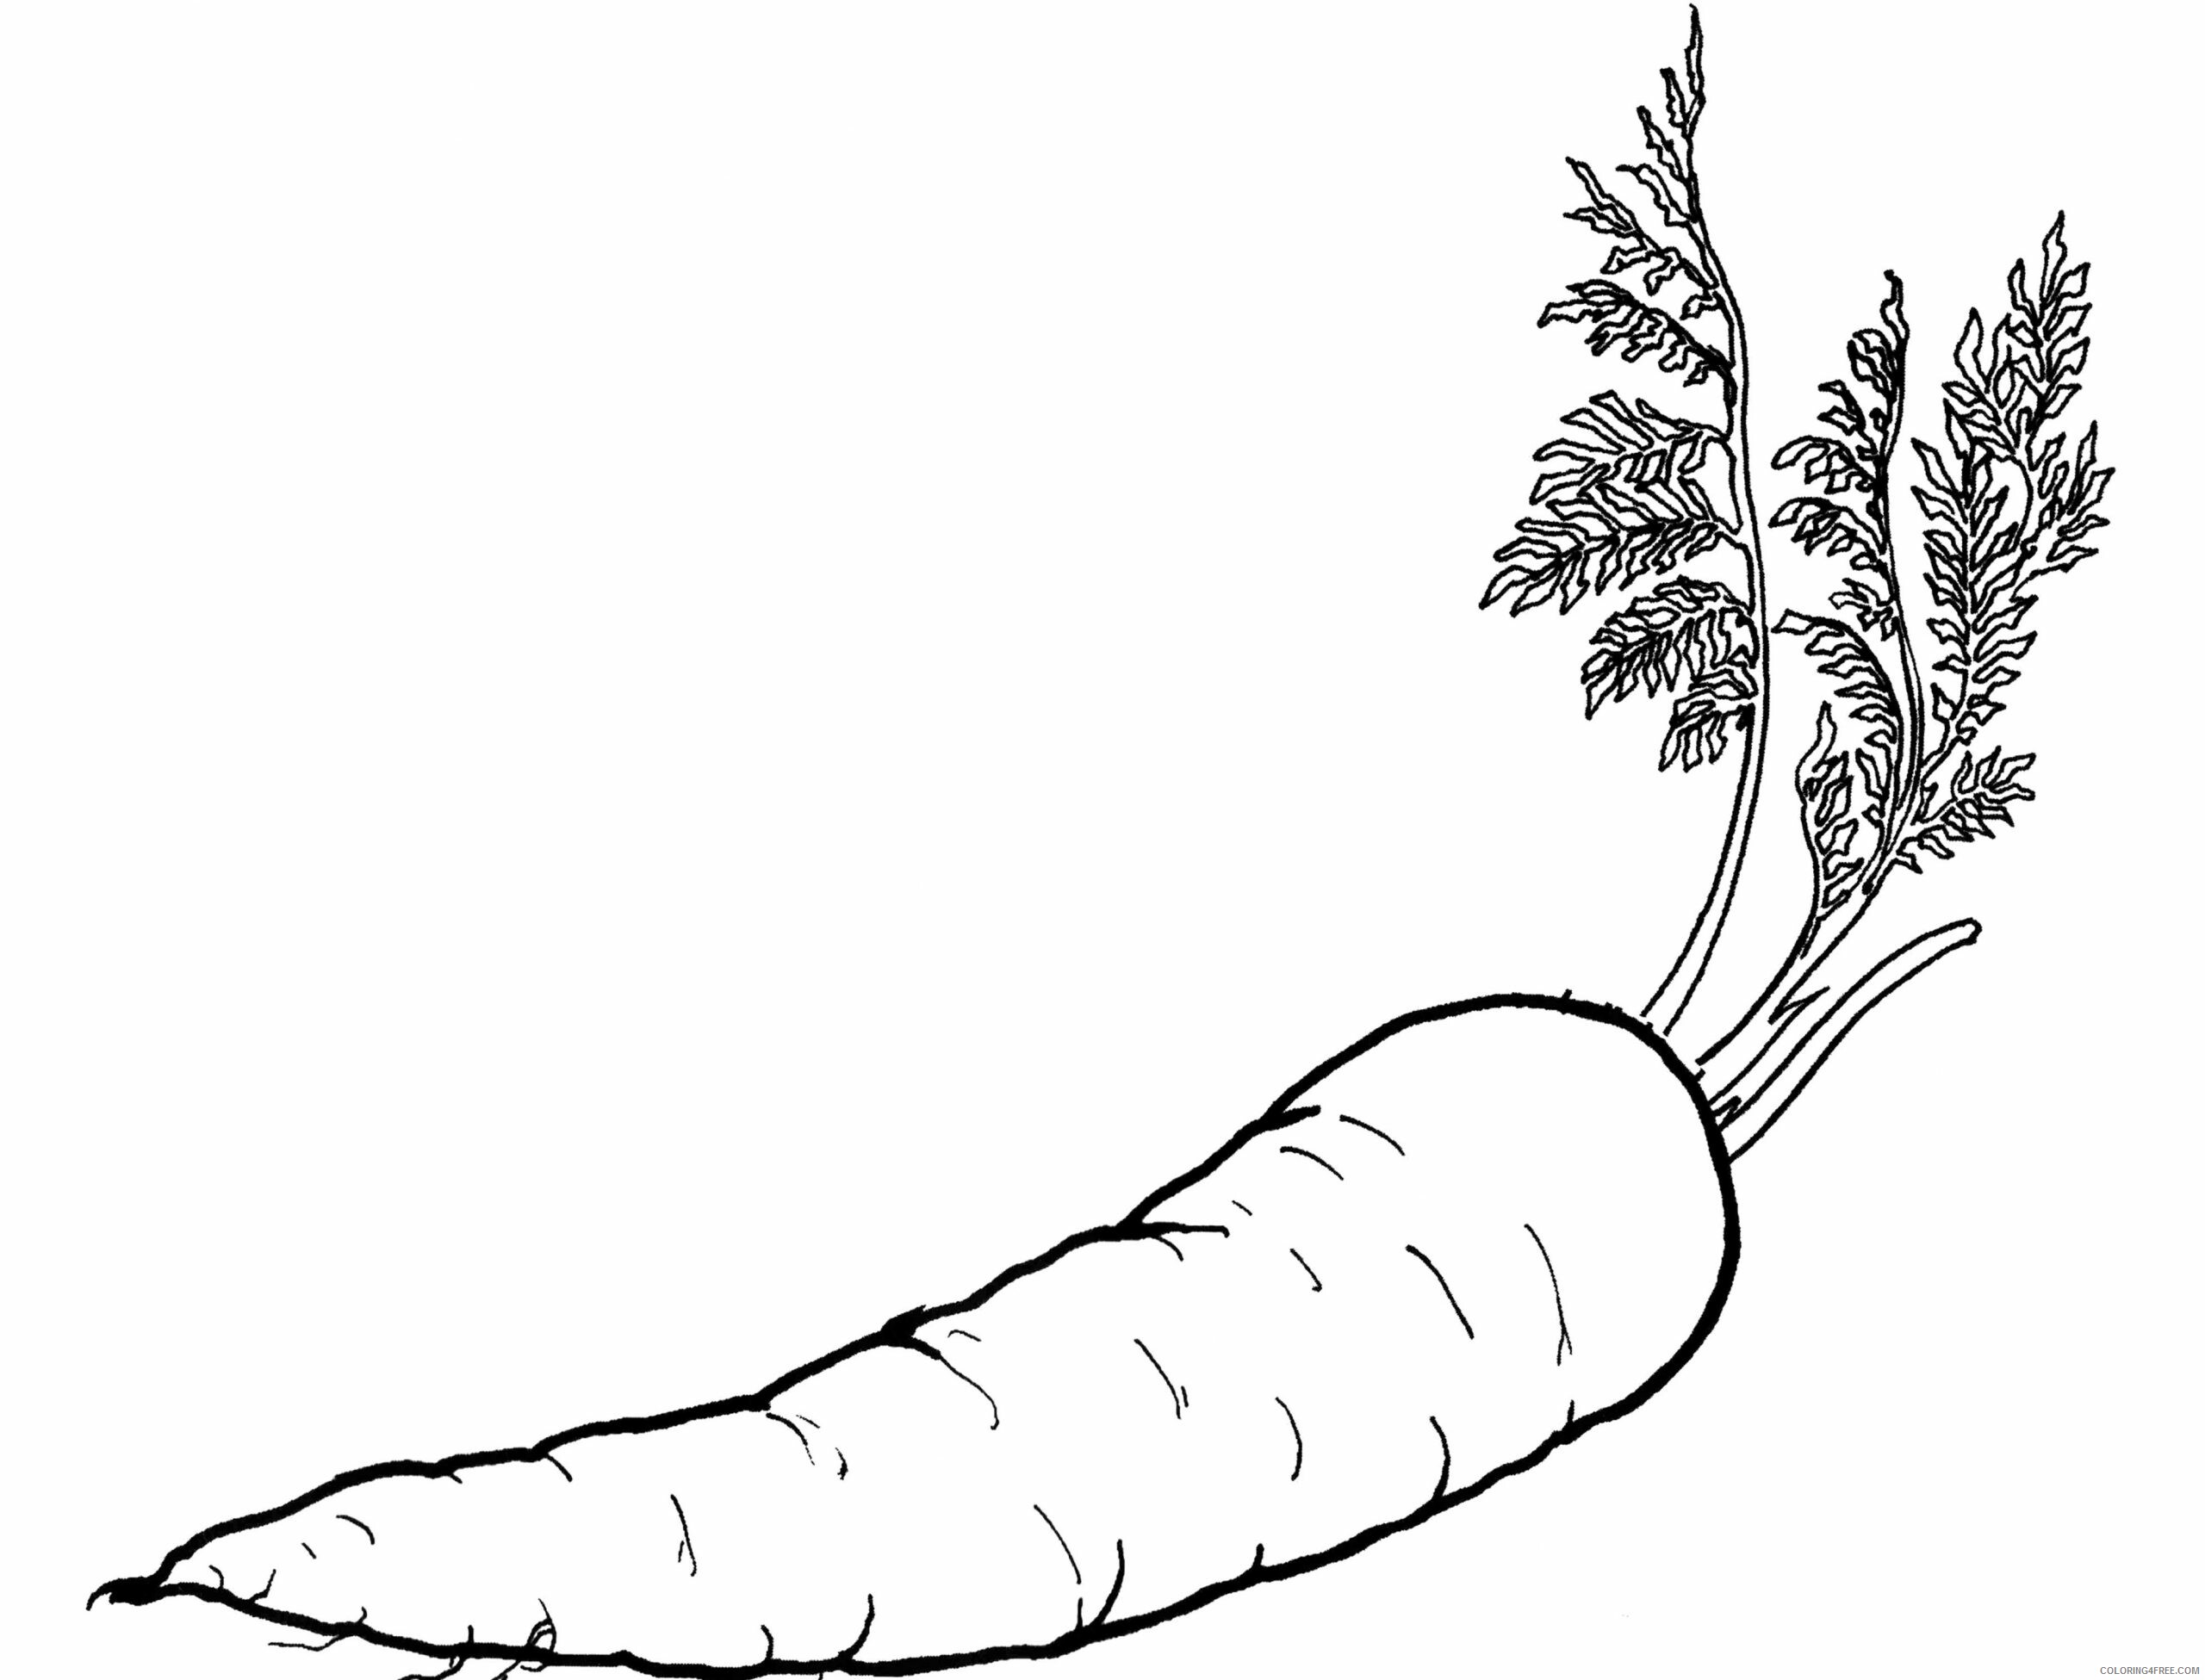 Carrot Coloring Pages Vegetables Food Easy Carrot scaled Printable 2021 536 Coloring4free